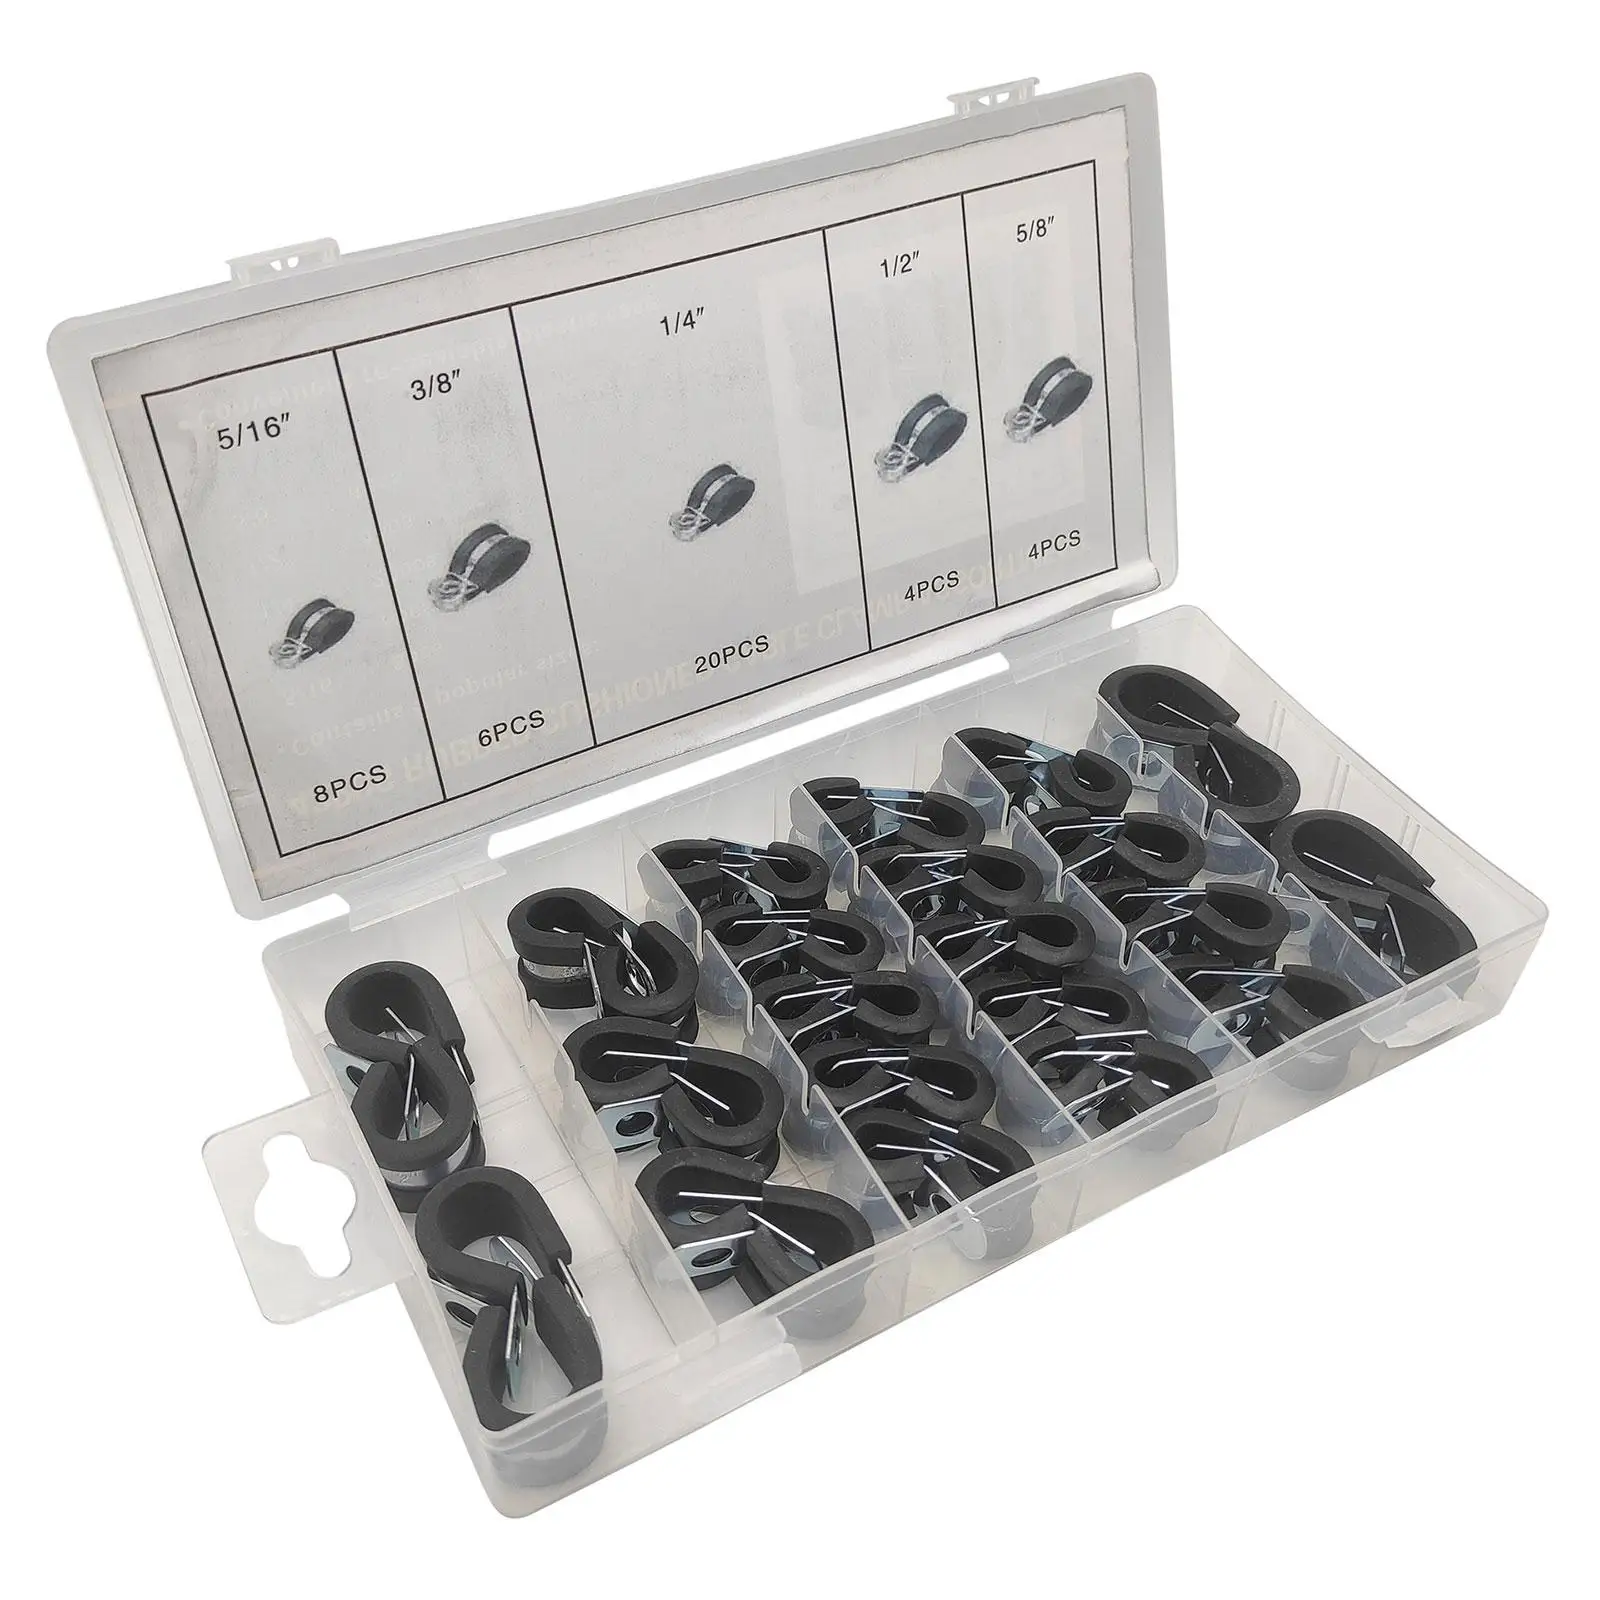 42Pcs Cable Clamps Accessories with Rubber Cushioned Pipe Fittings Pipe Clamps for Industry Cable Installation